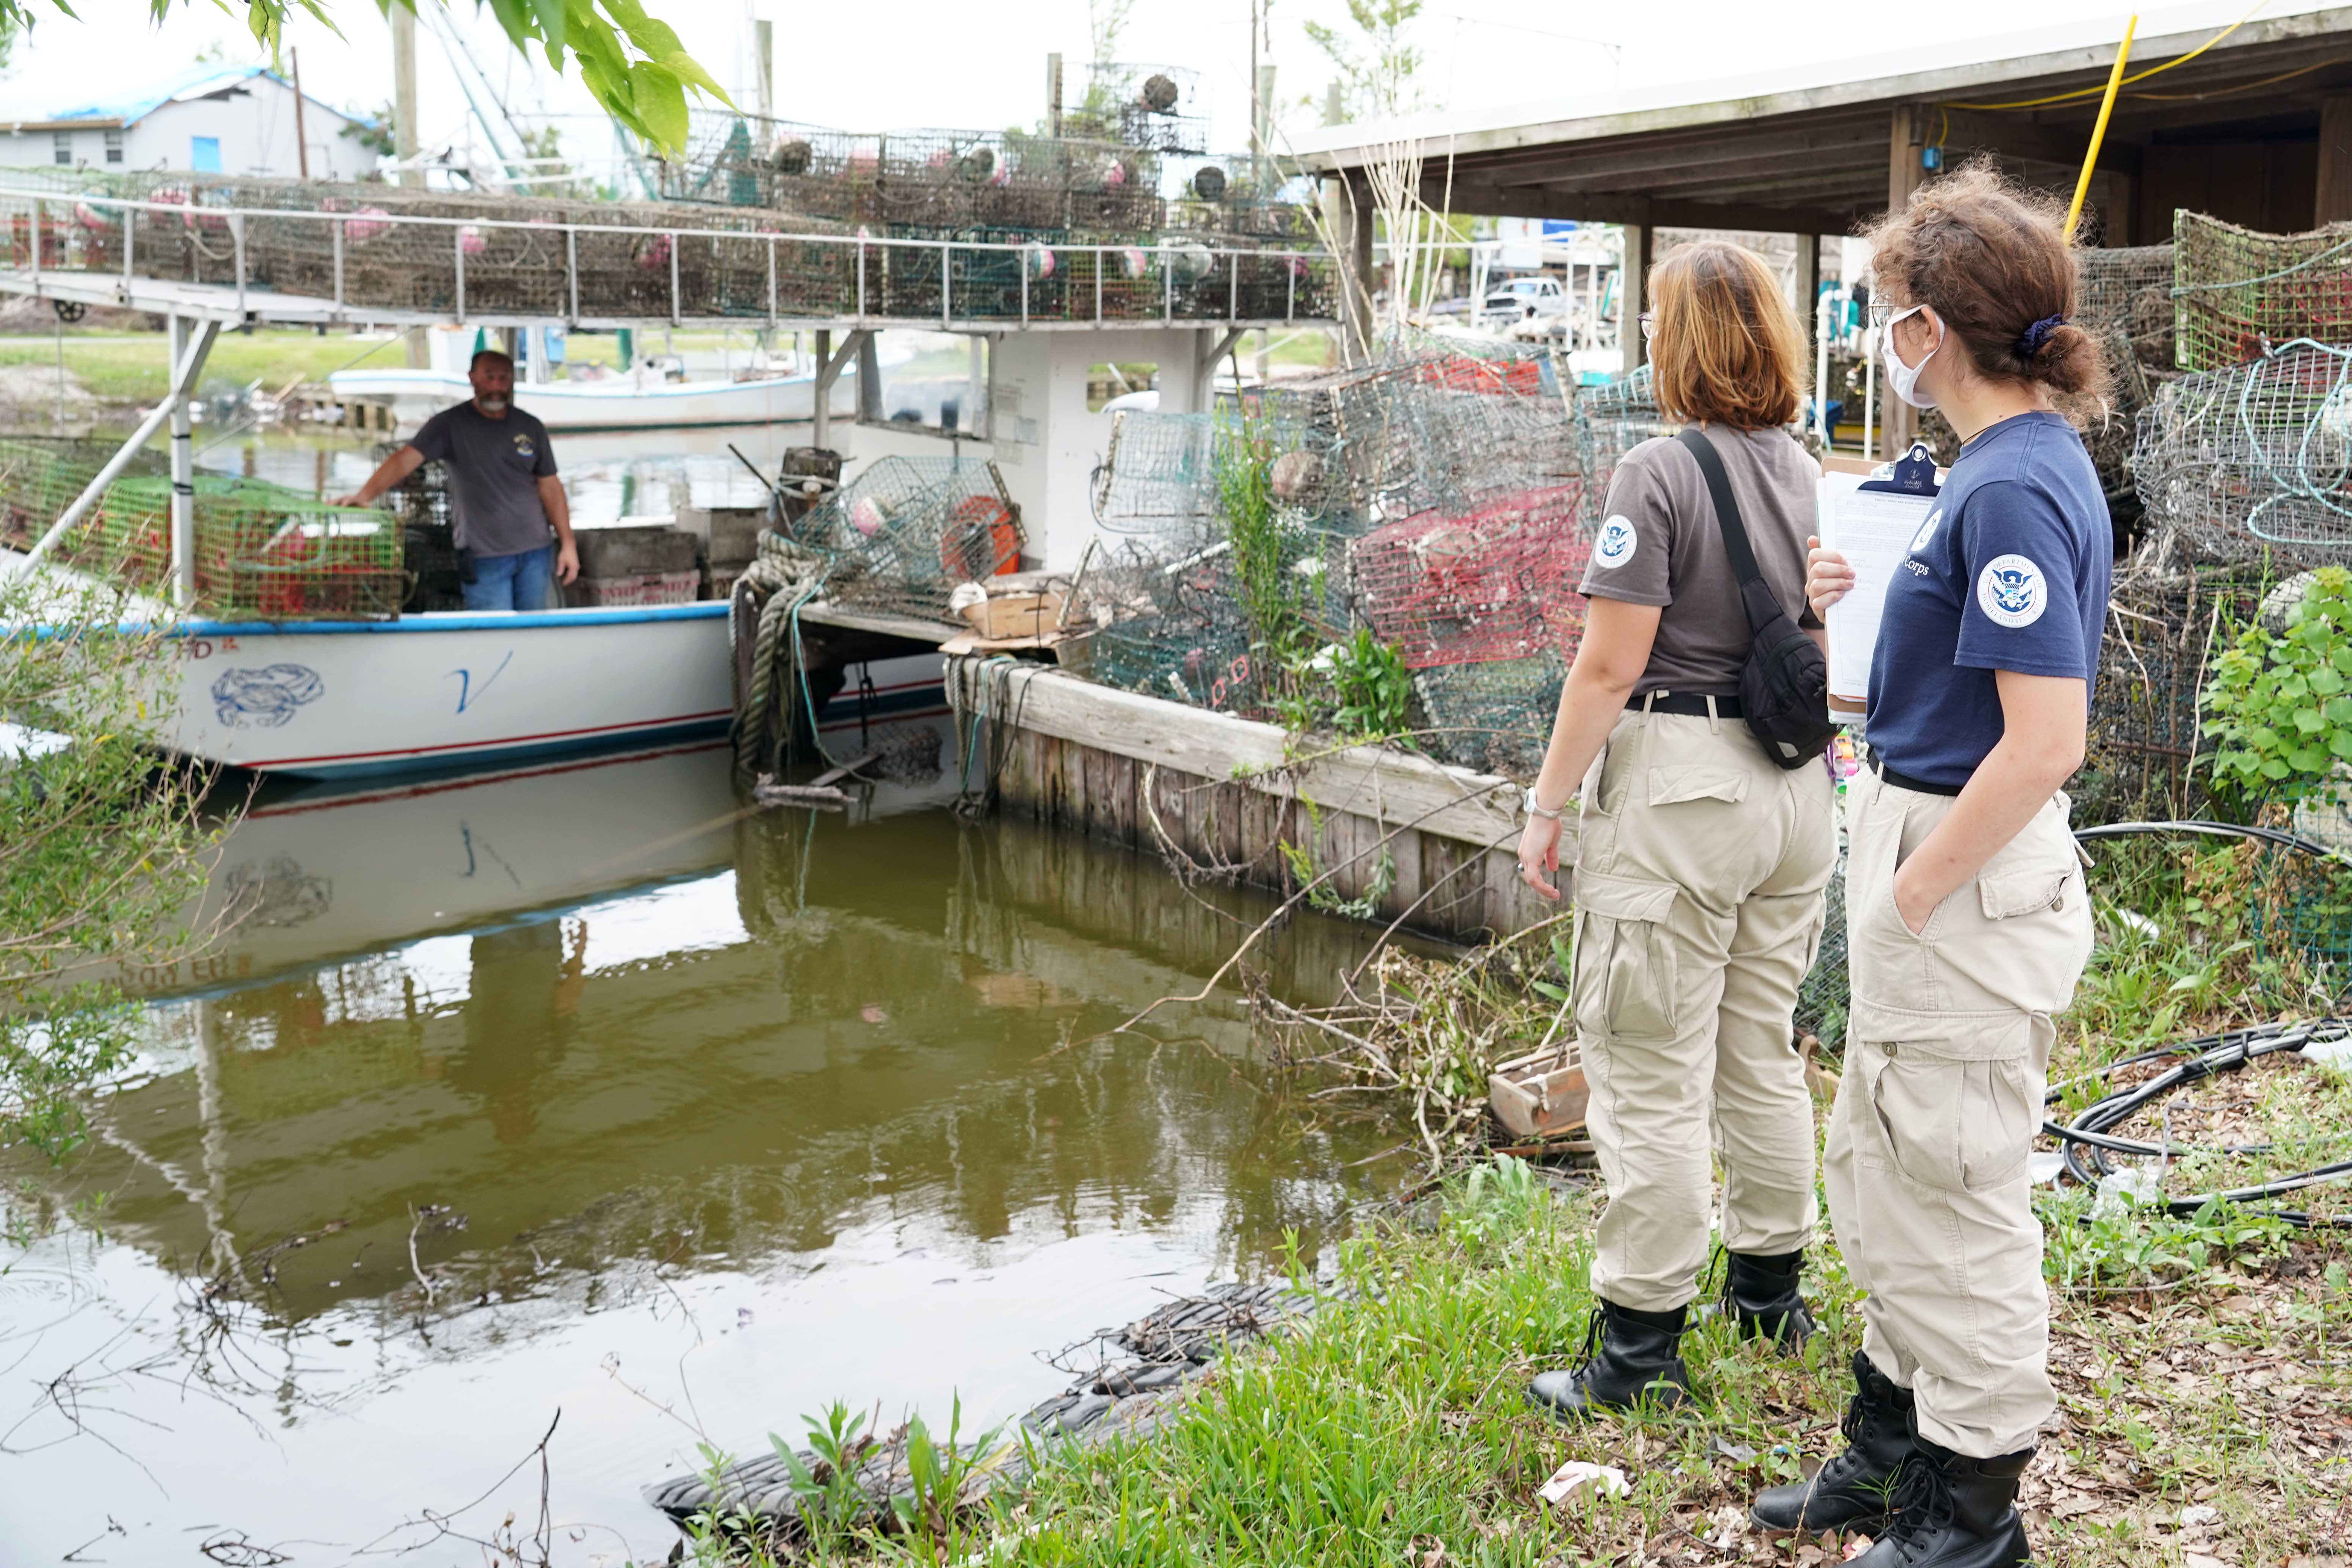 Members of a FEMA Disaster Survivor Assistance crew walk door to door (or boat to boat) to help residents apply for assistance after Hurricane Ida.  Photo by Julie Joseph, FEMA.